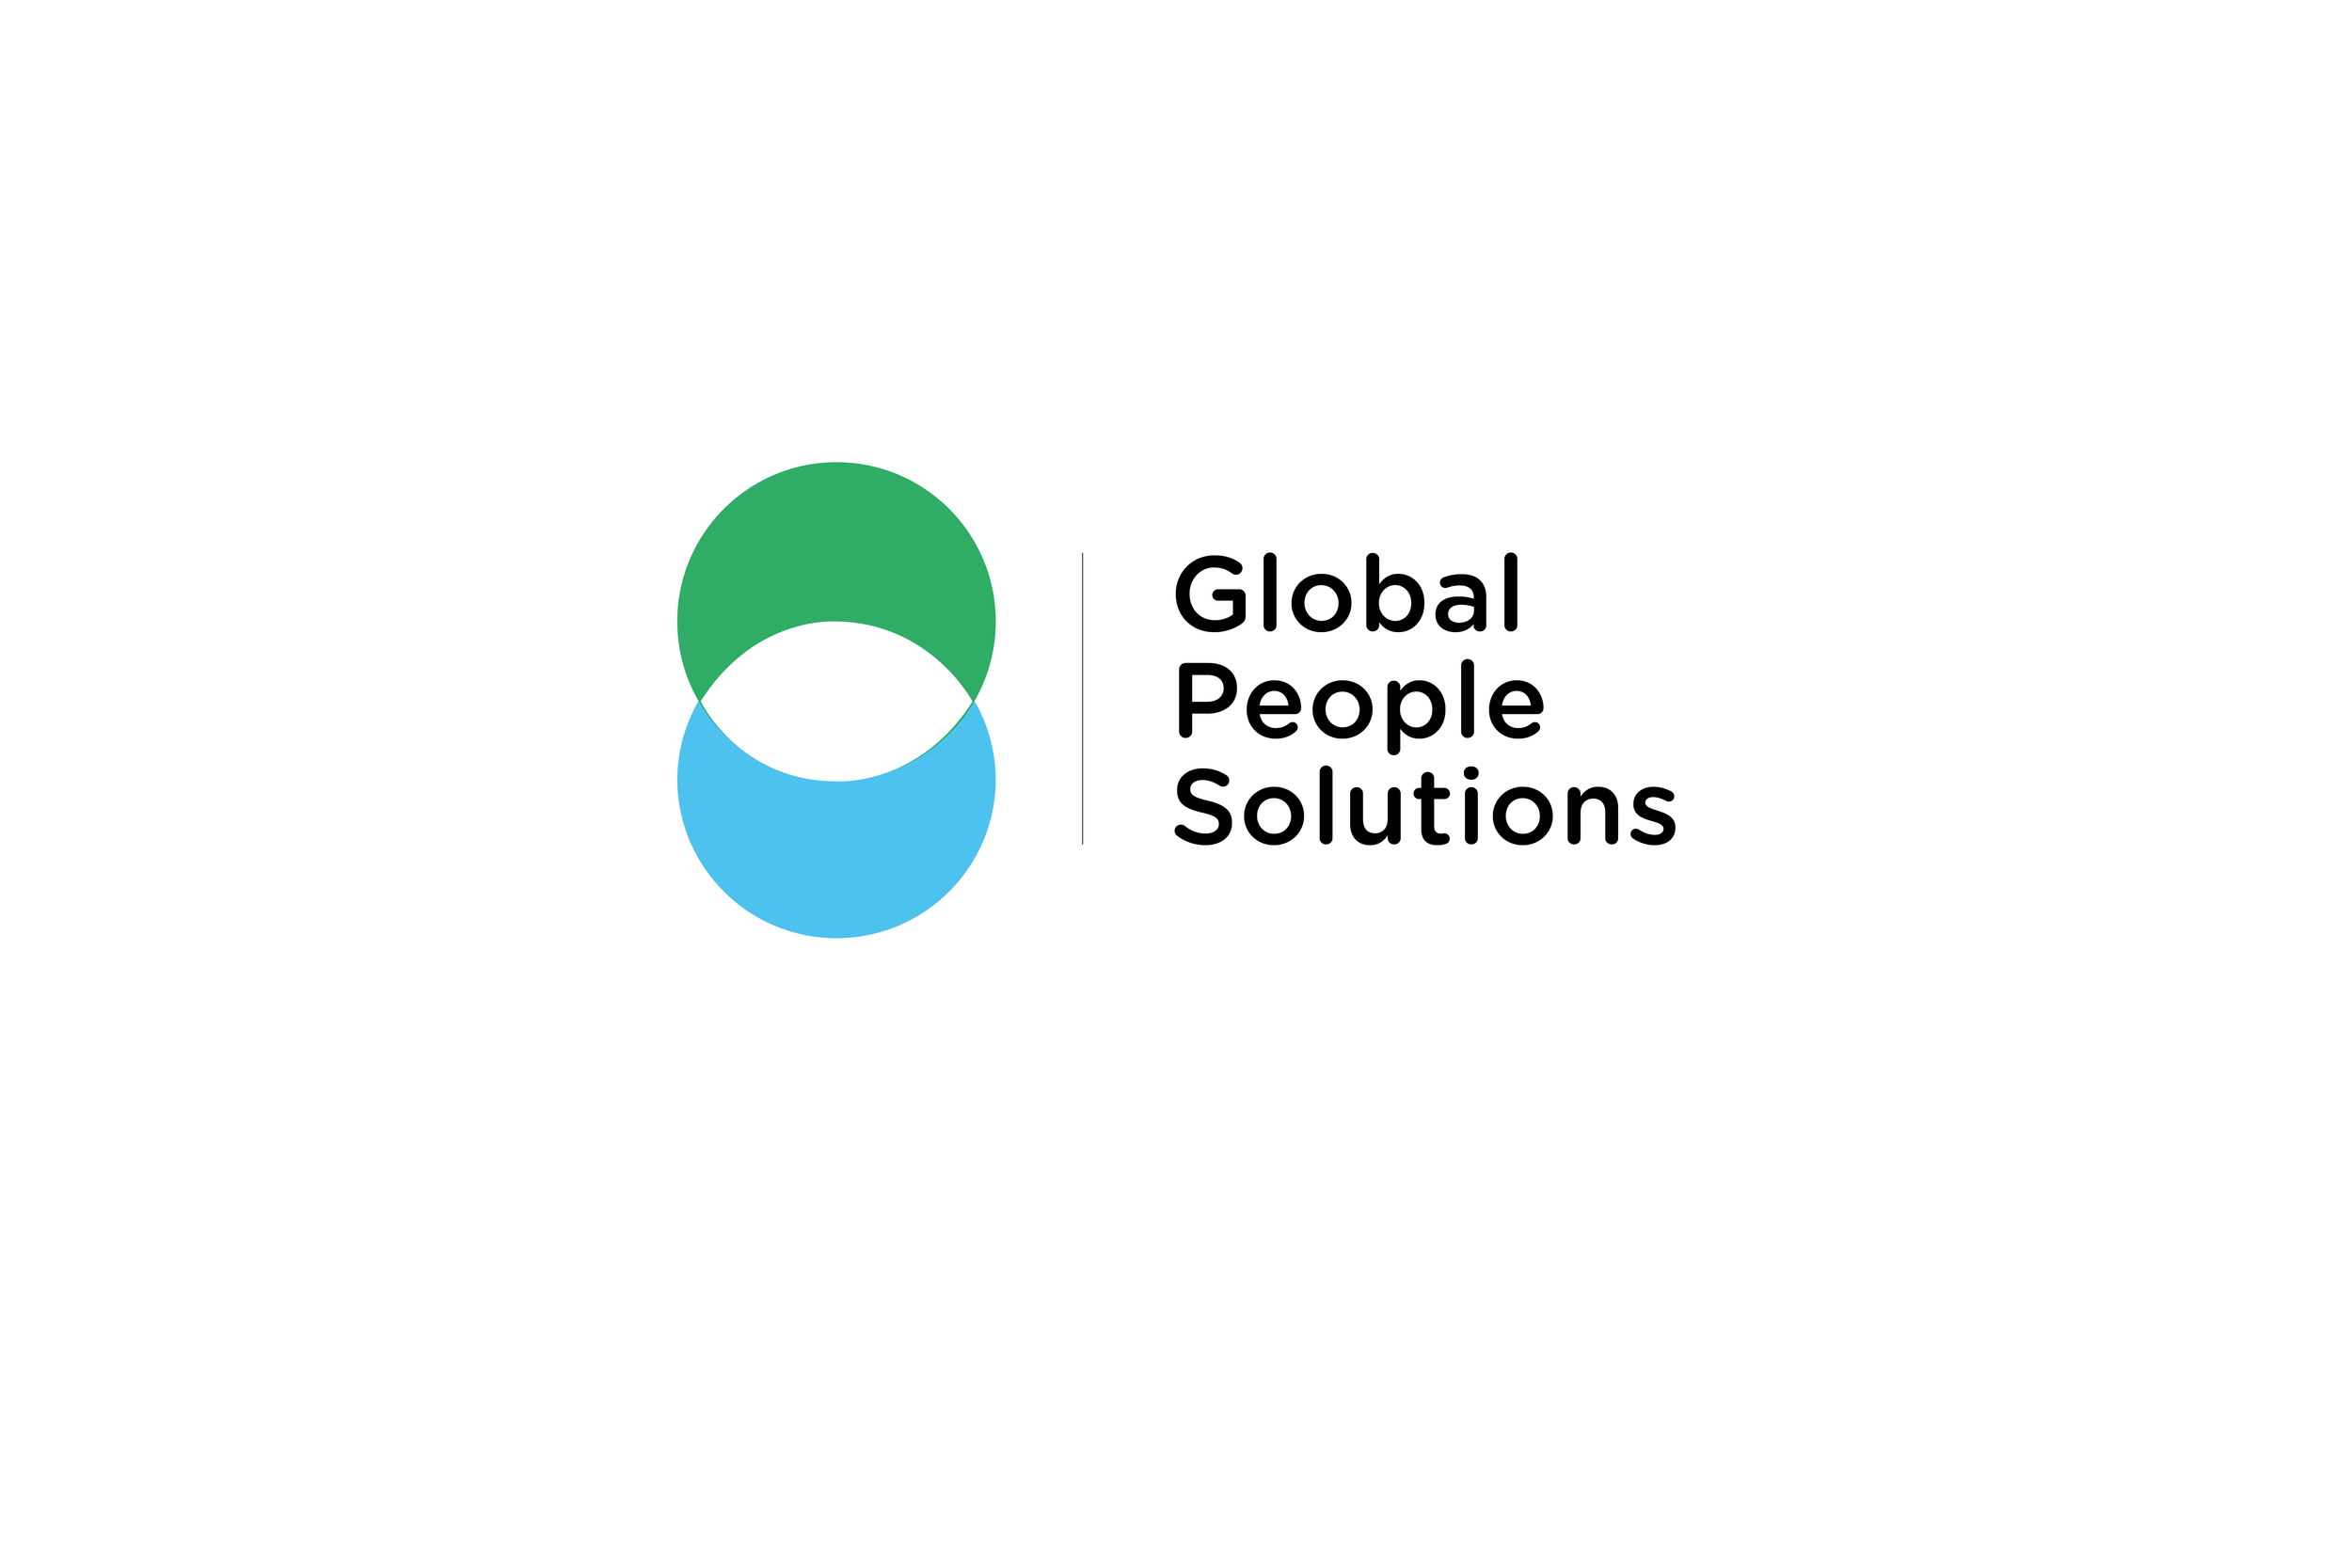 Brand consultant UK - Global People Solutions brand logo in white background